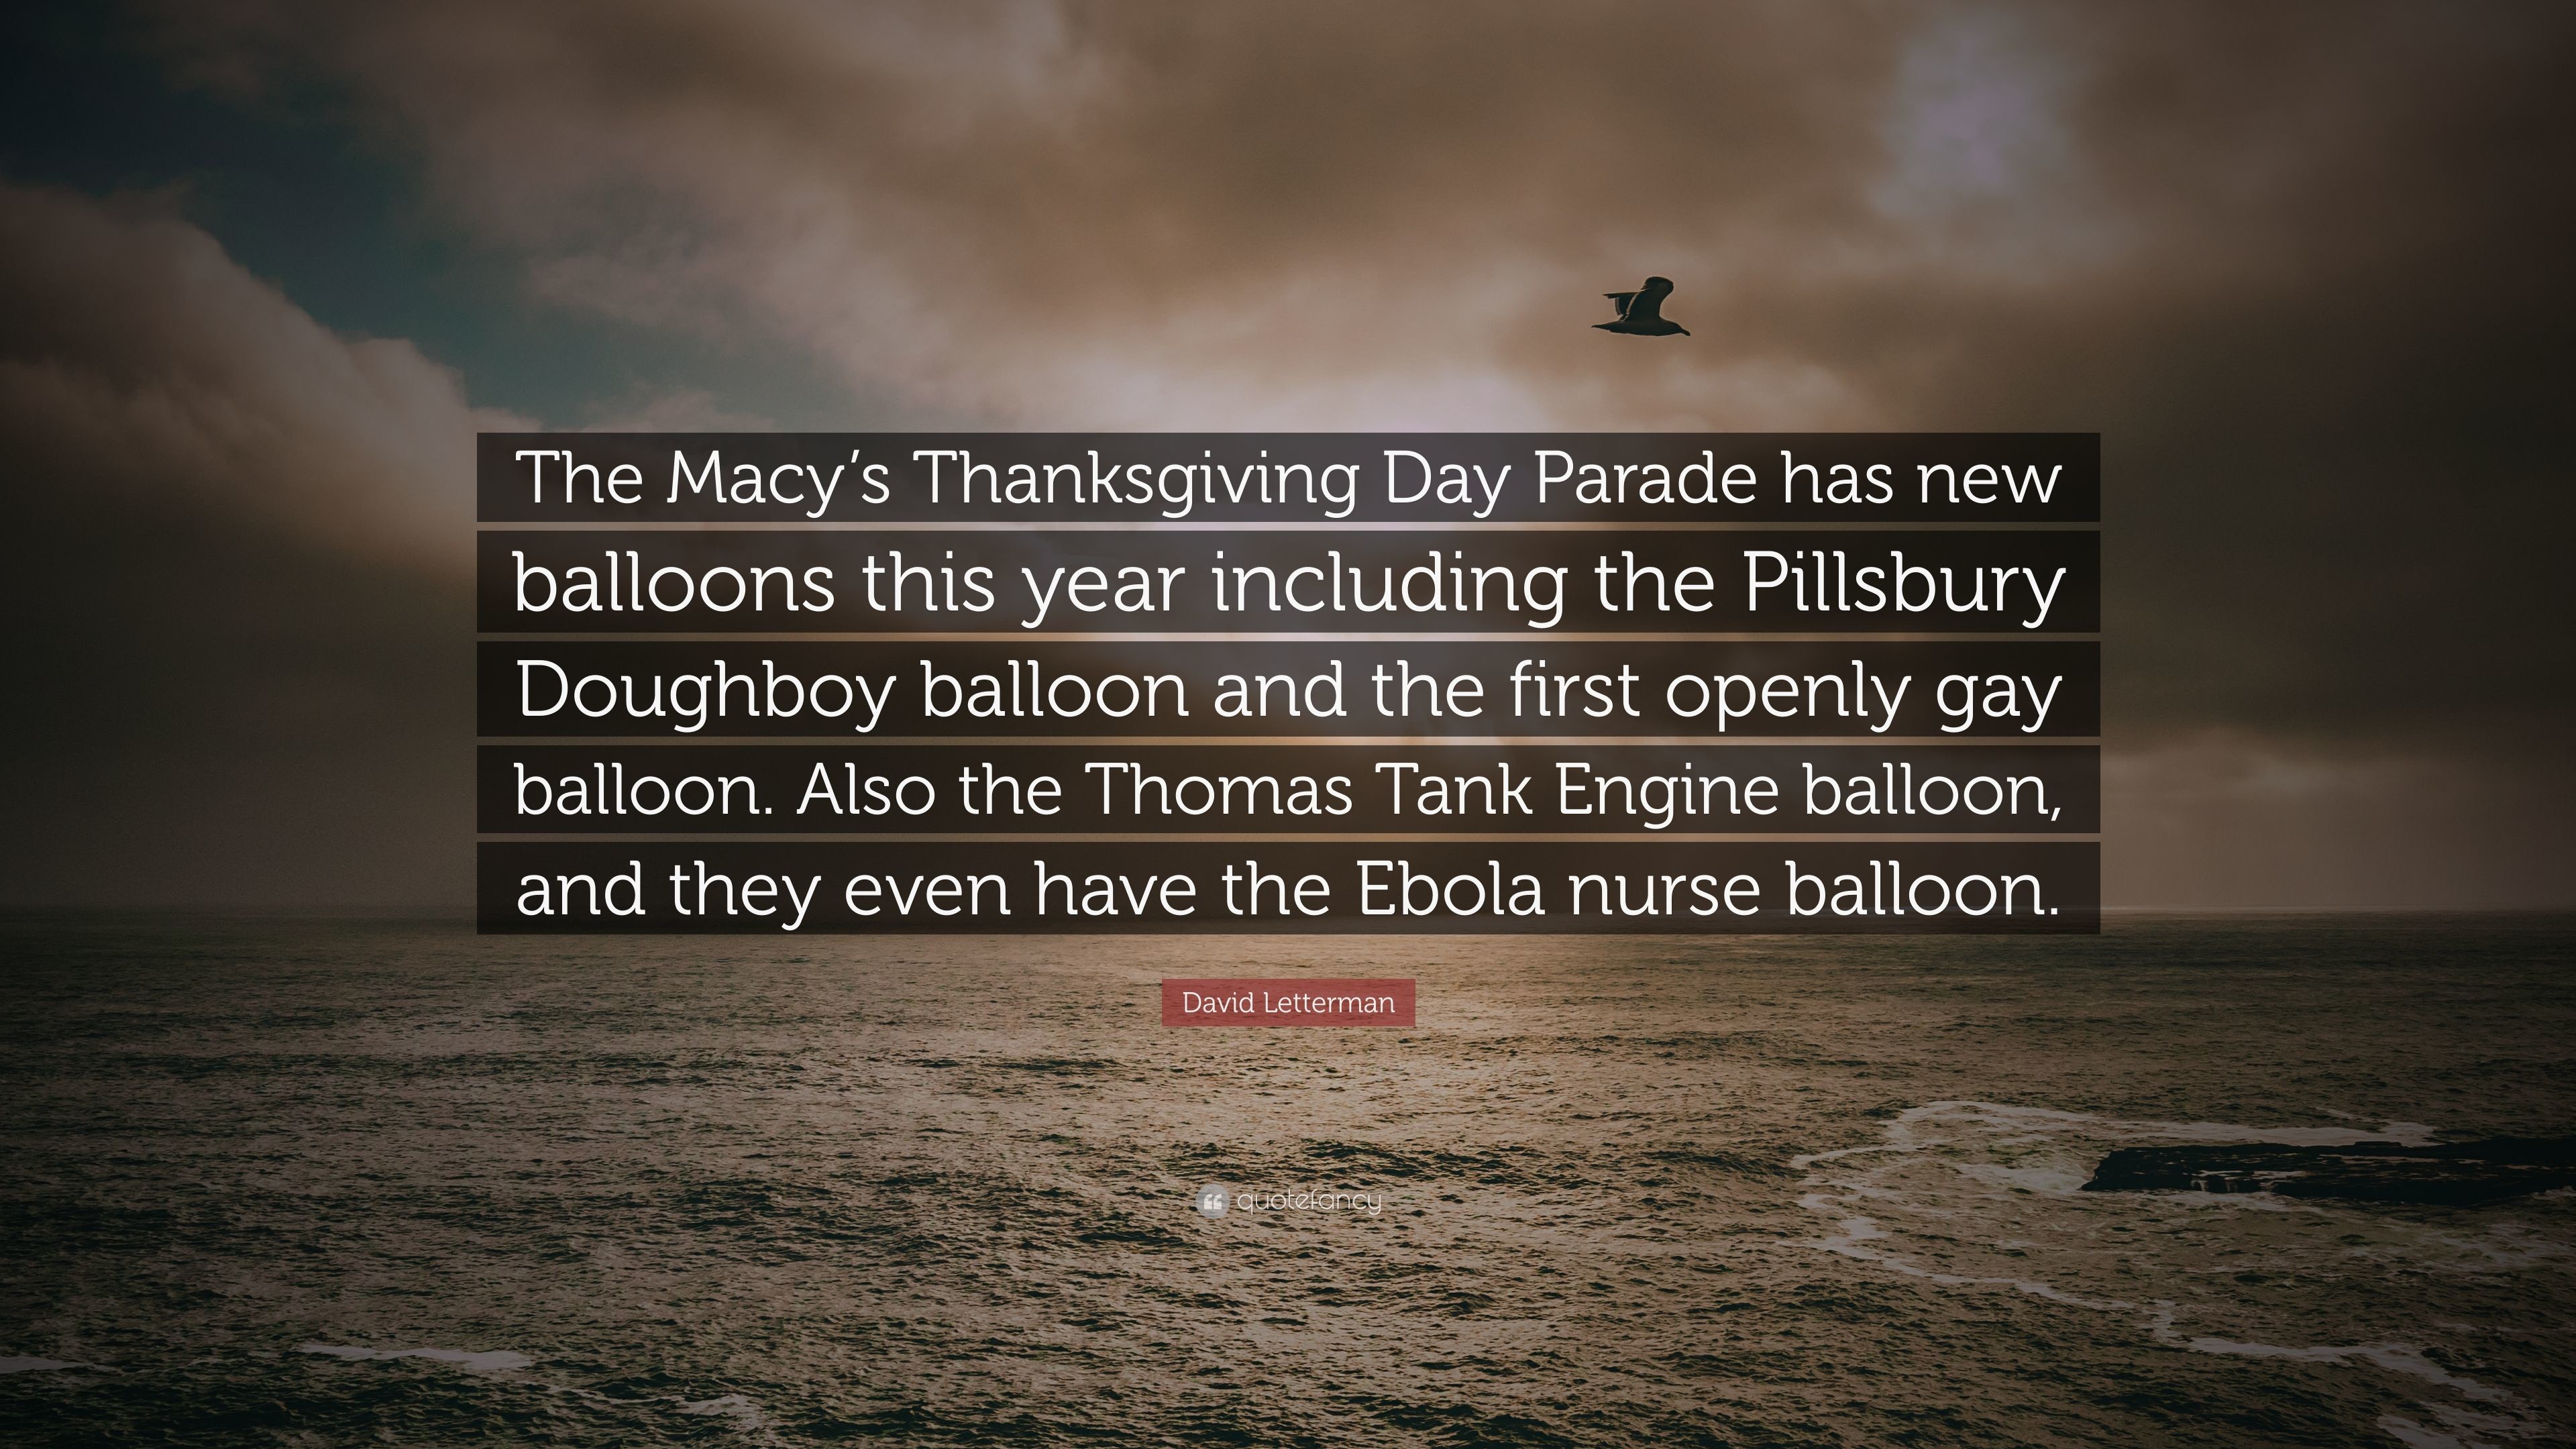 3840x2160 David Letterman Quote: “The Macy's Thanksgiving Day Parade has new balloons  this year including